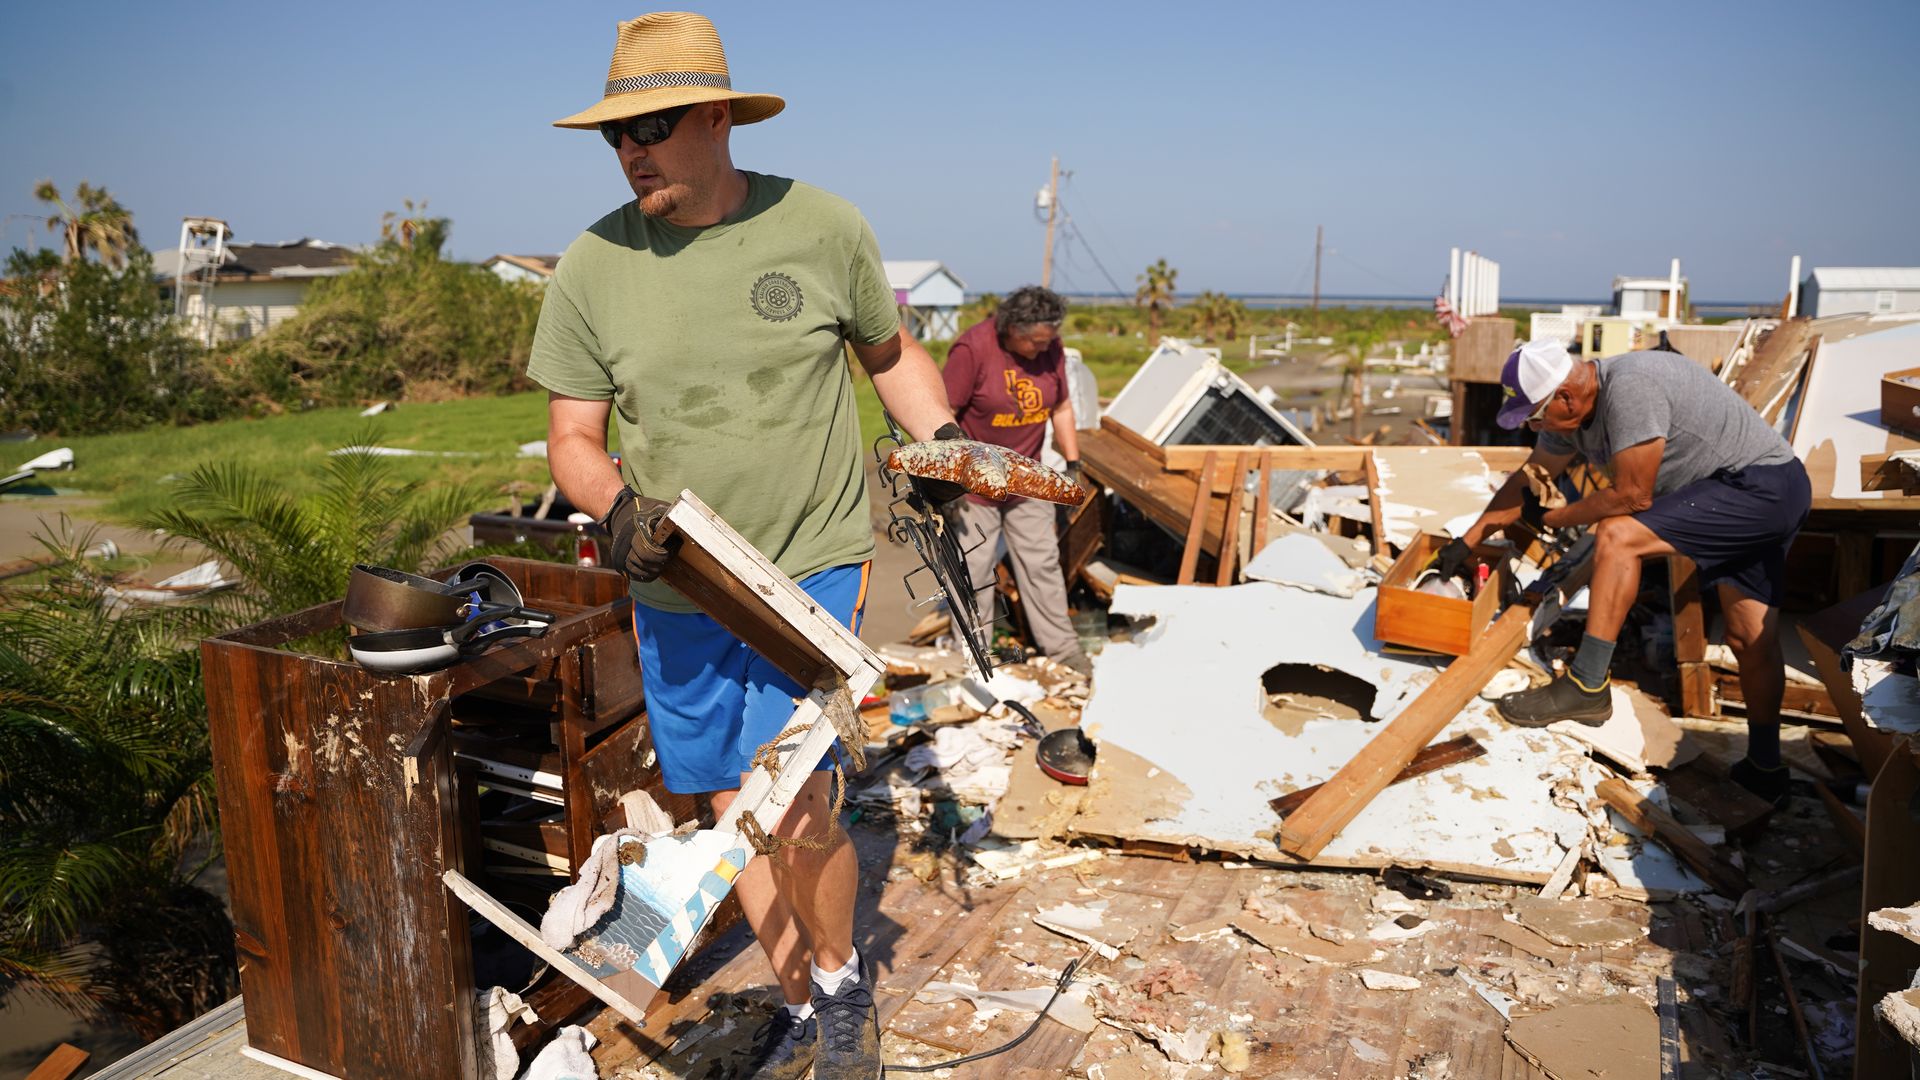 A family clean up their storm-damaged house after Hurricane Ida on September 4, 2021 in Grand Isle, Louisiana.